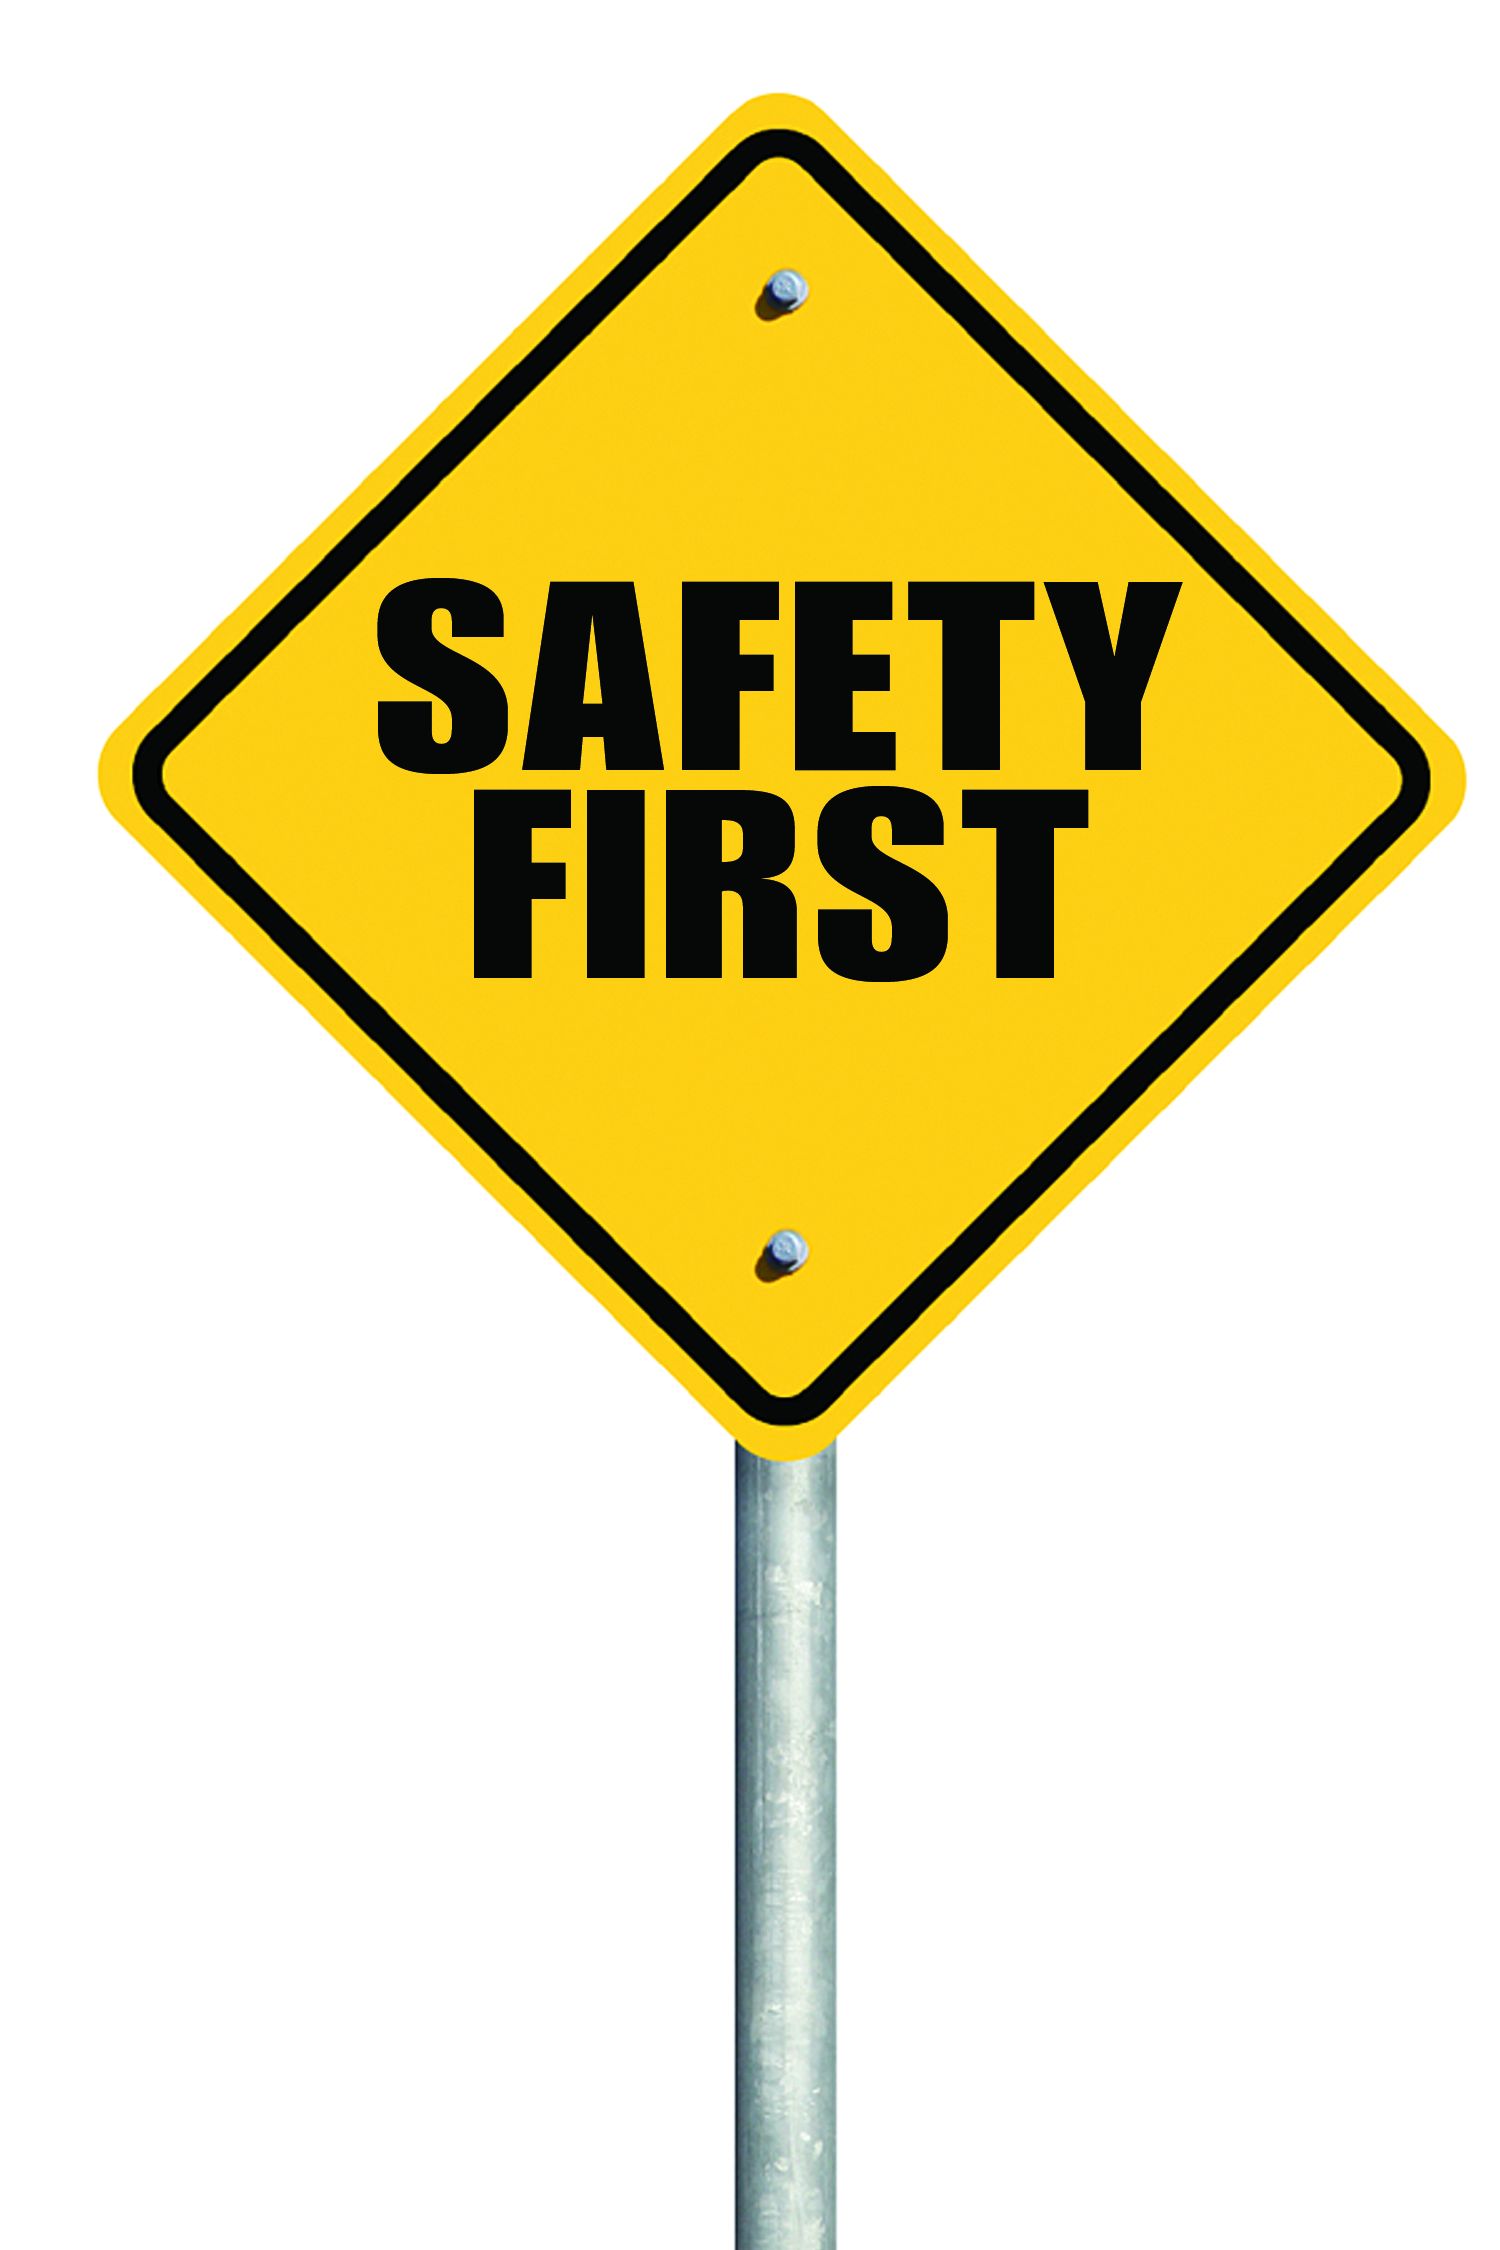 Free Safety, Download Free Safety png images, Free